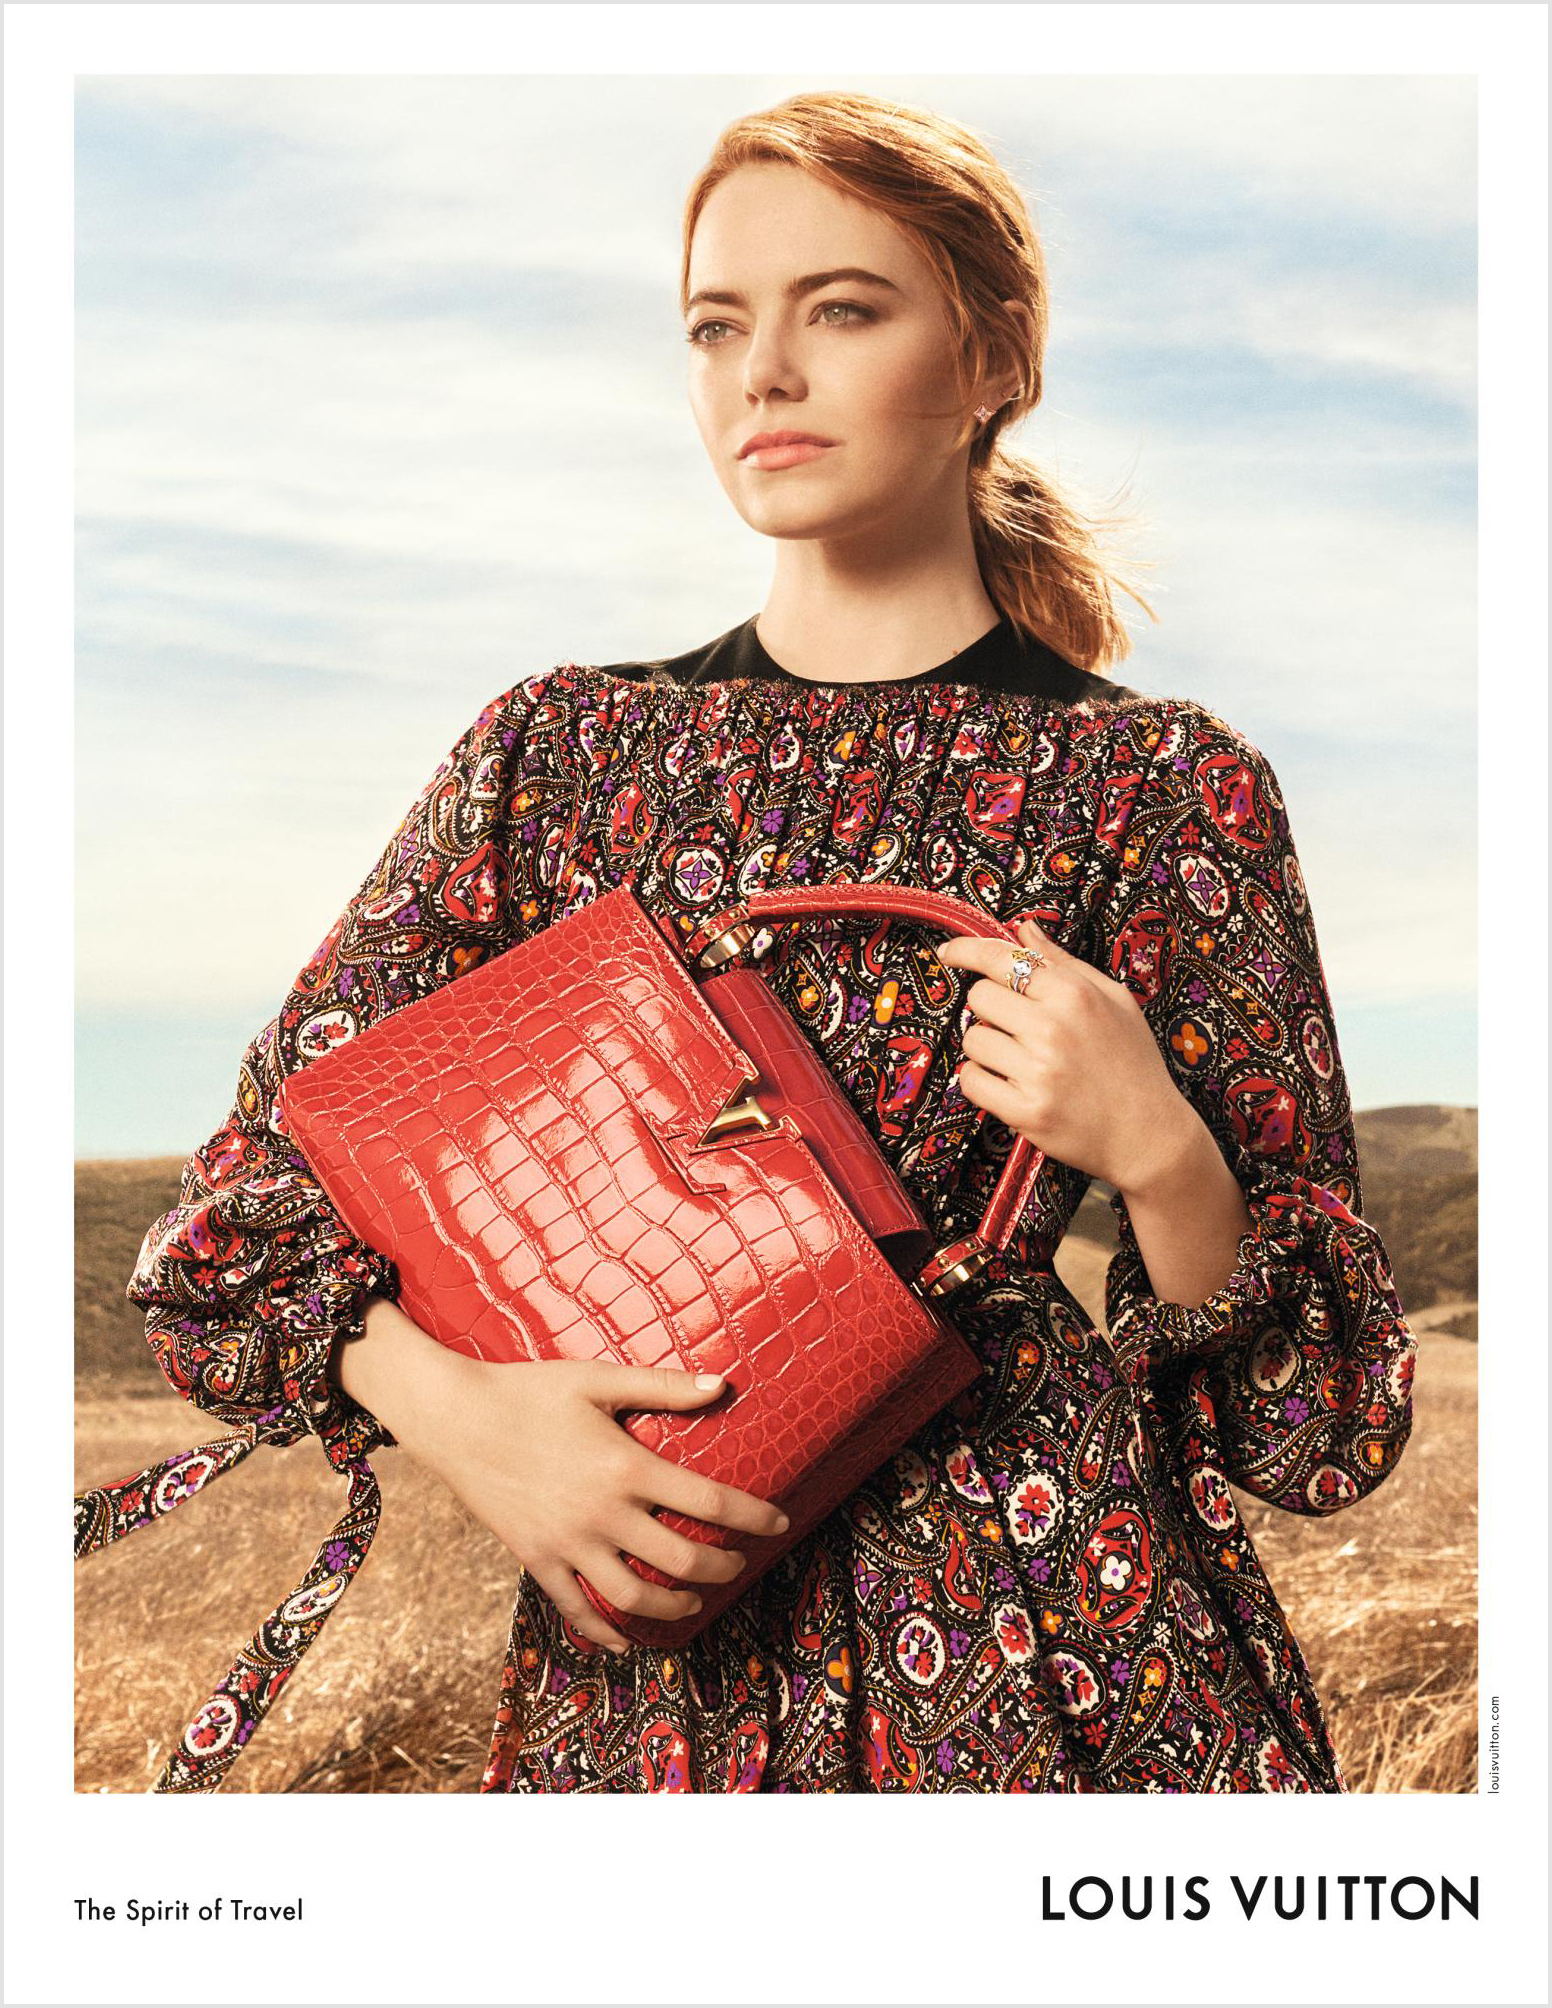 Memos From The Middle East: Louis Vuitton Unveils New Campaign